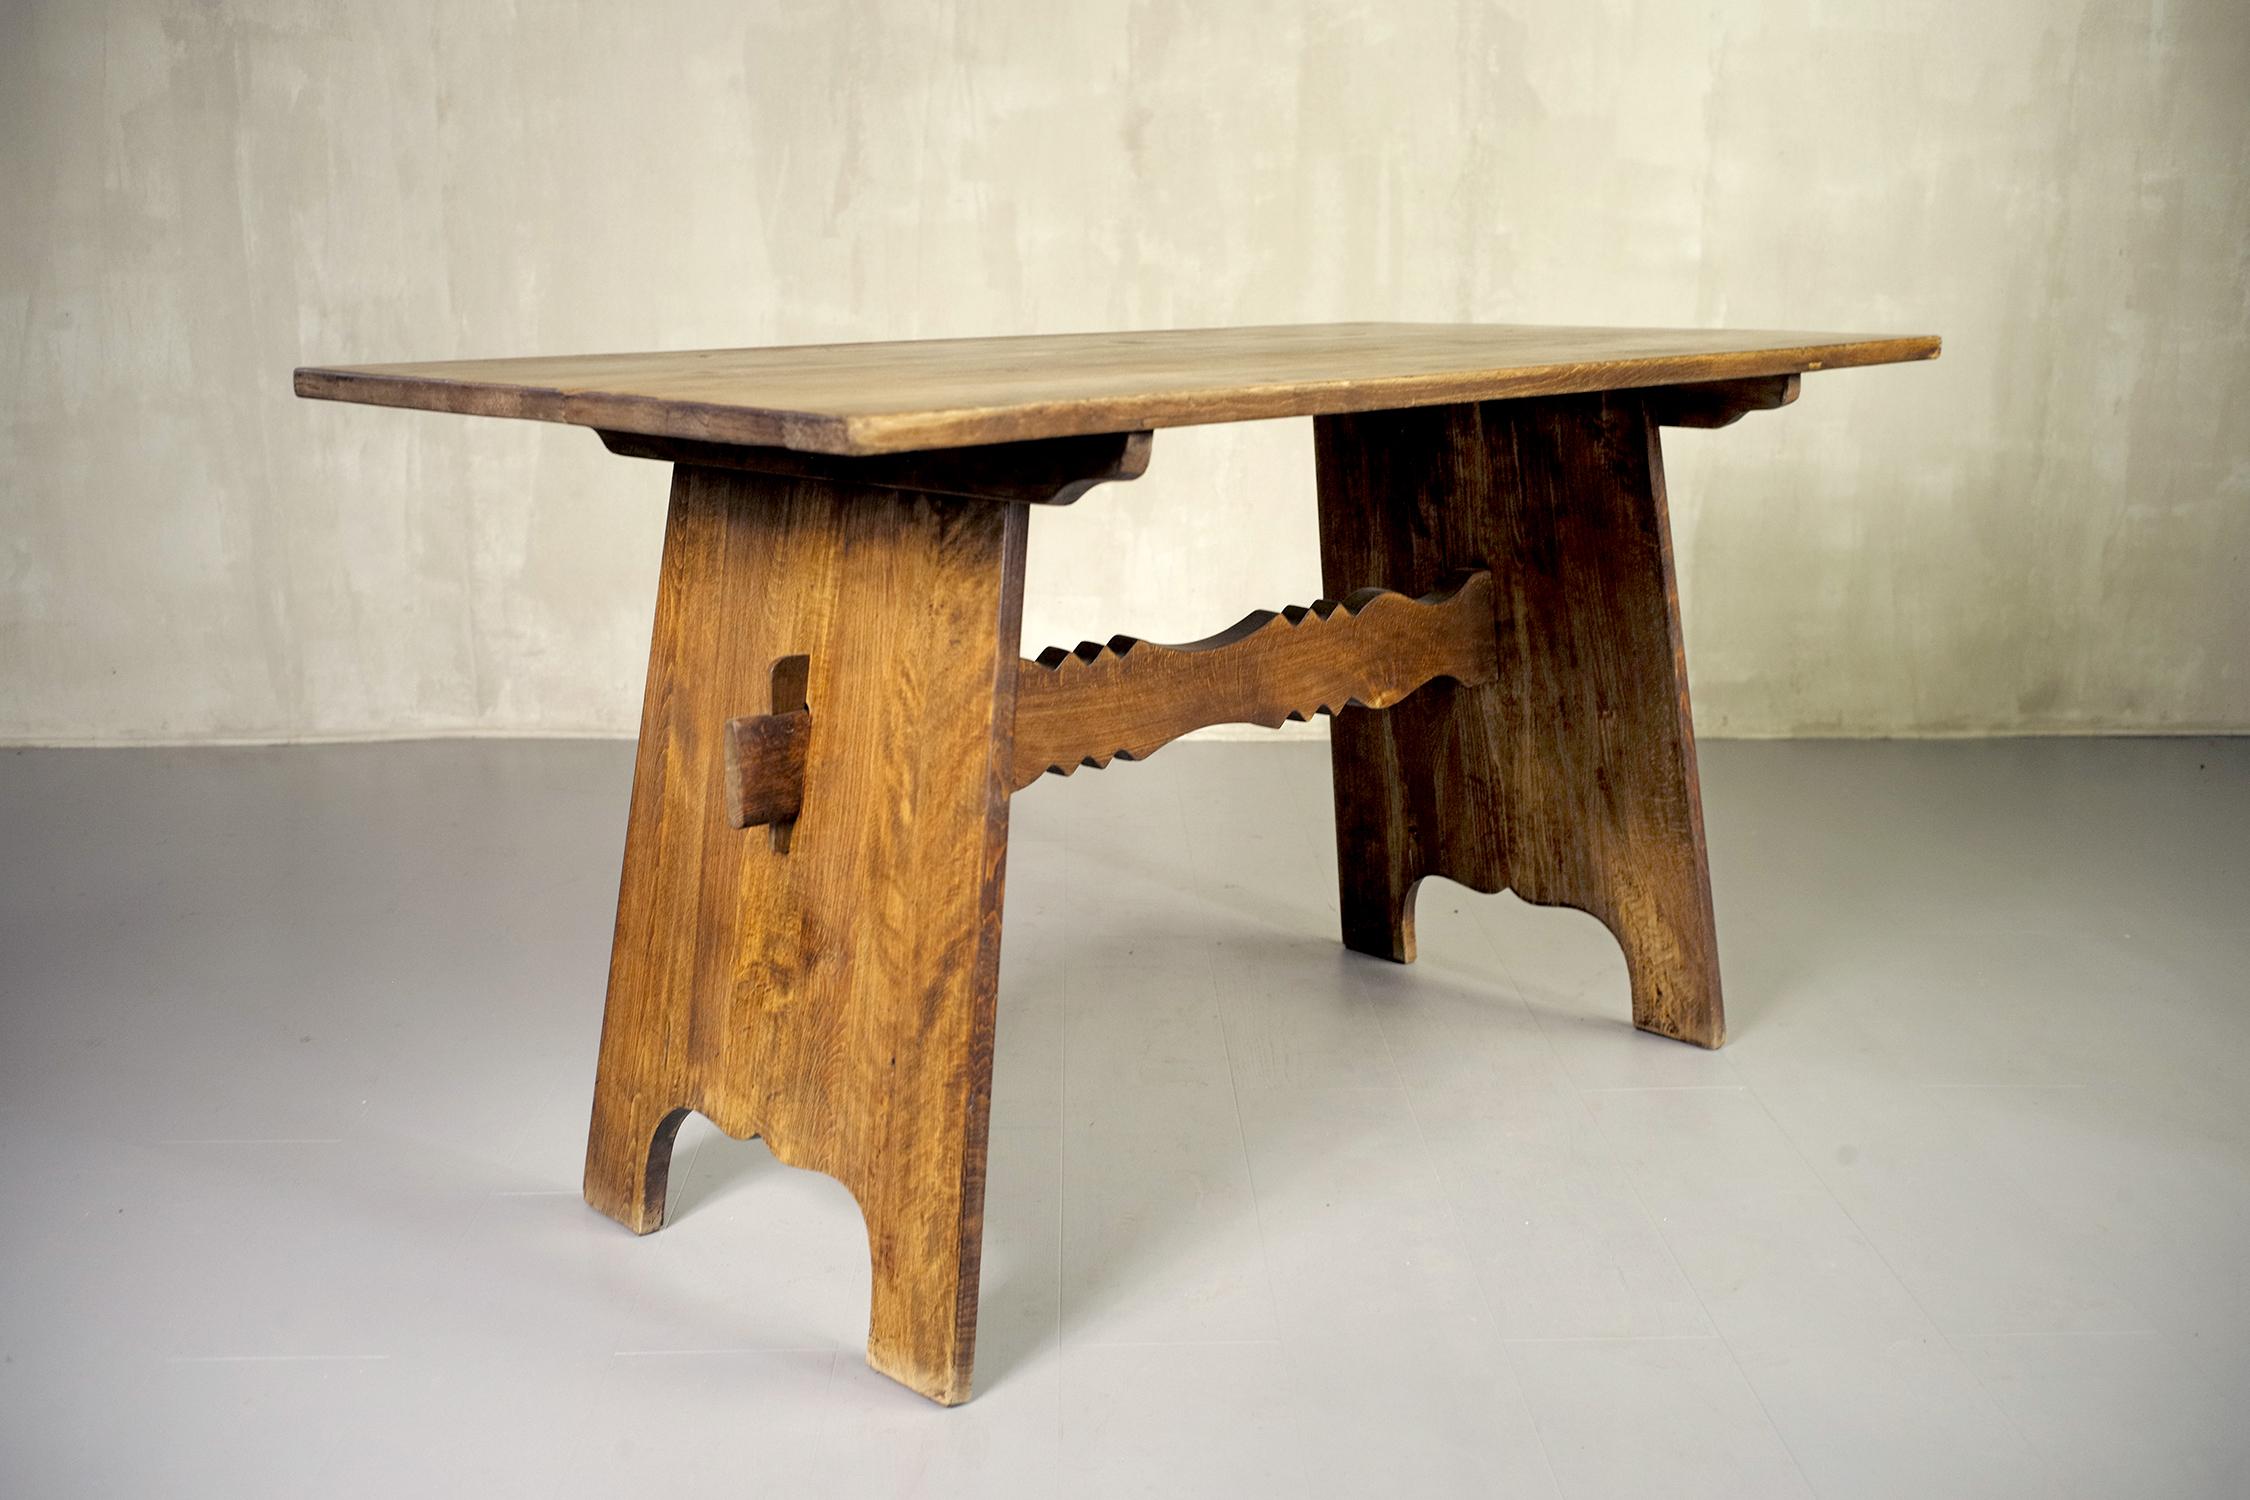 Desk and chair in solid beech, Germany 1945. This furniture was intended for French officers stationed in Germany immediately after the war. Folk Art style, this set is one of the few to have escaped destruction. Very good state.
Dimensions desk: